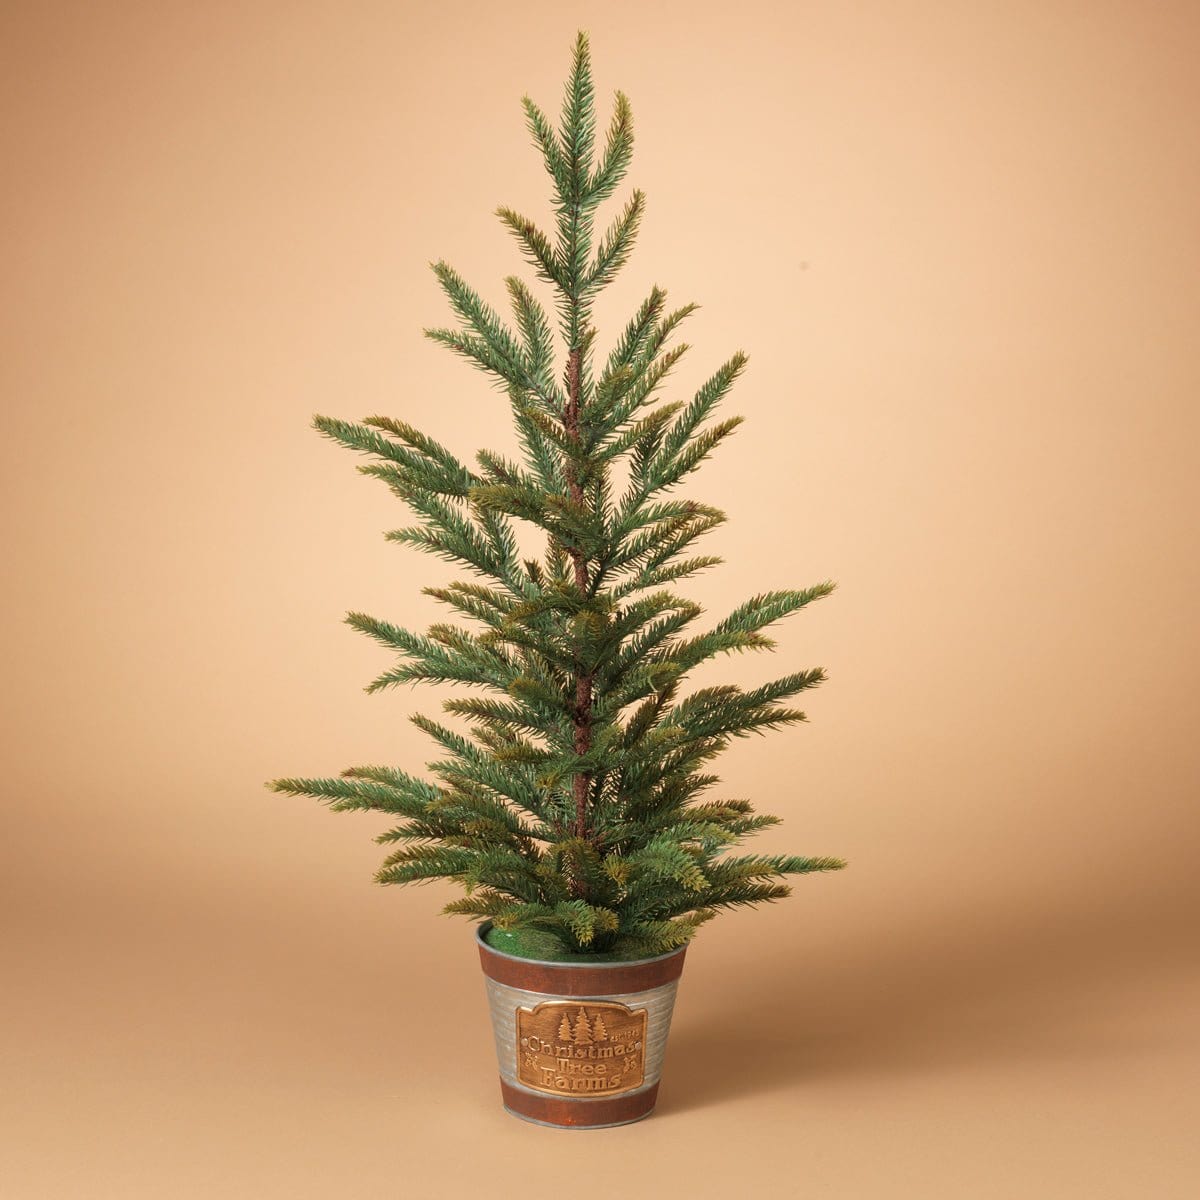 Miniature &quot; Christmas Tree Farms&quot; Pine Tree With Metal Container - 30&quot; H-Gerson-The Village Merchant